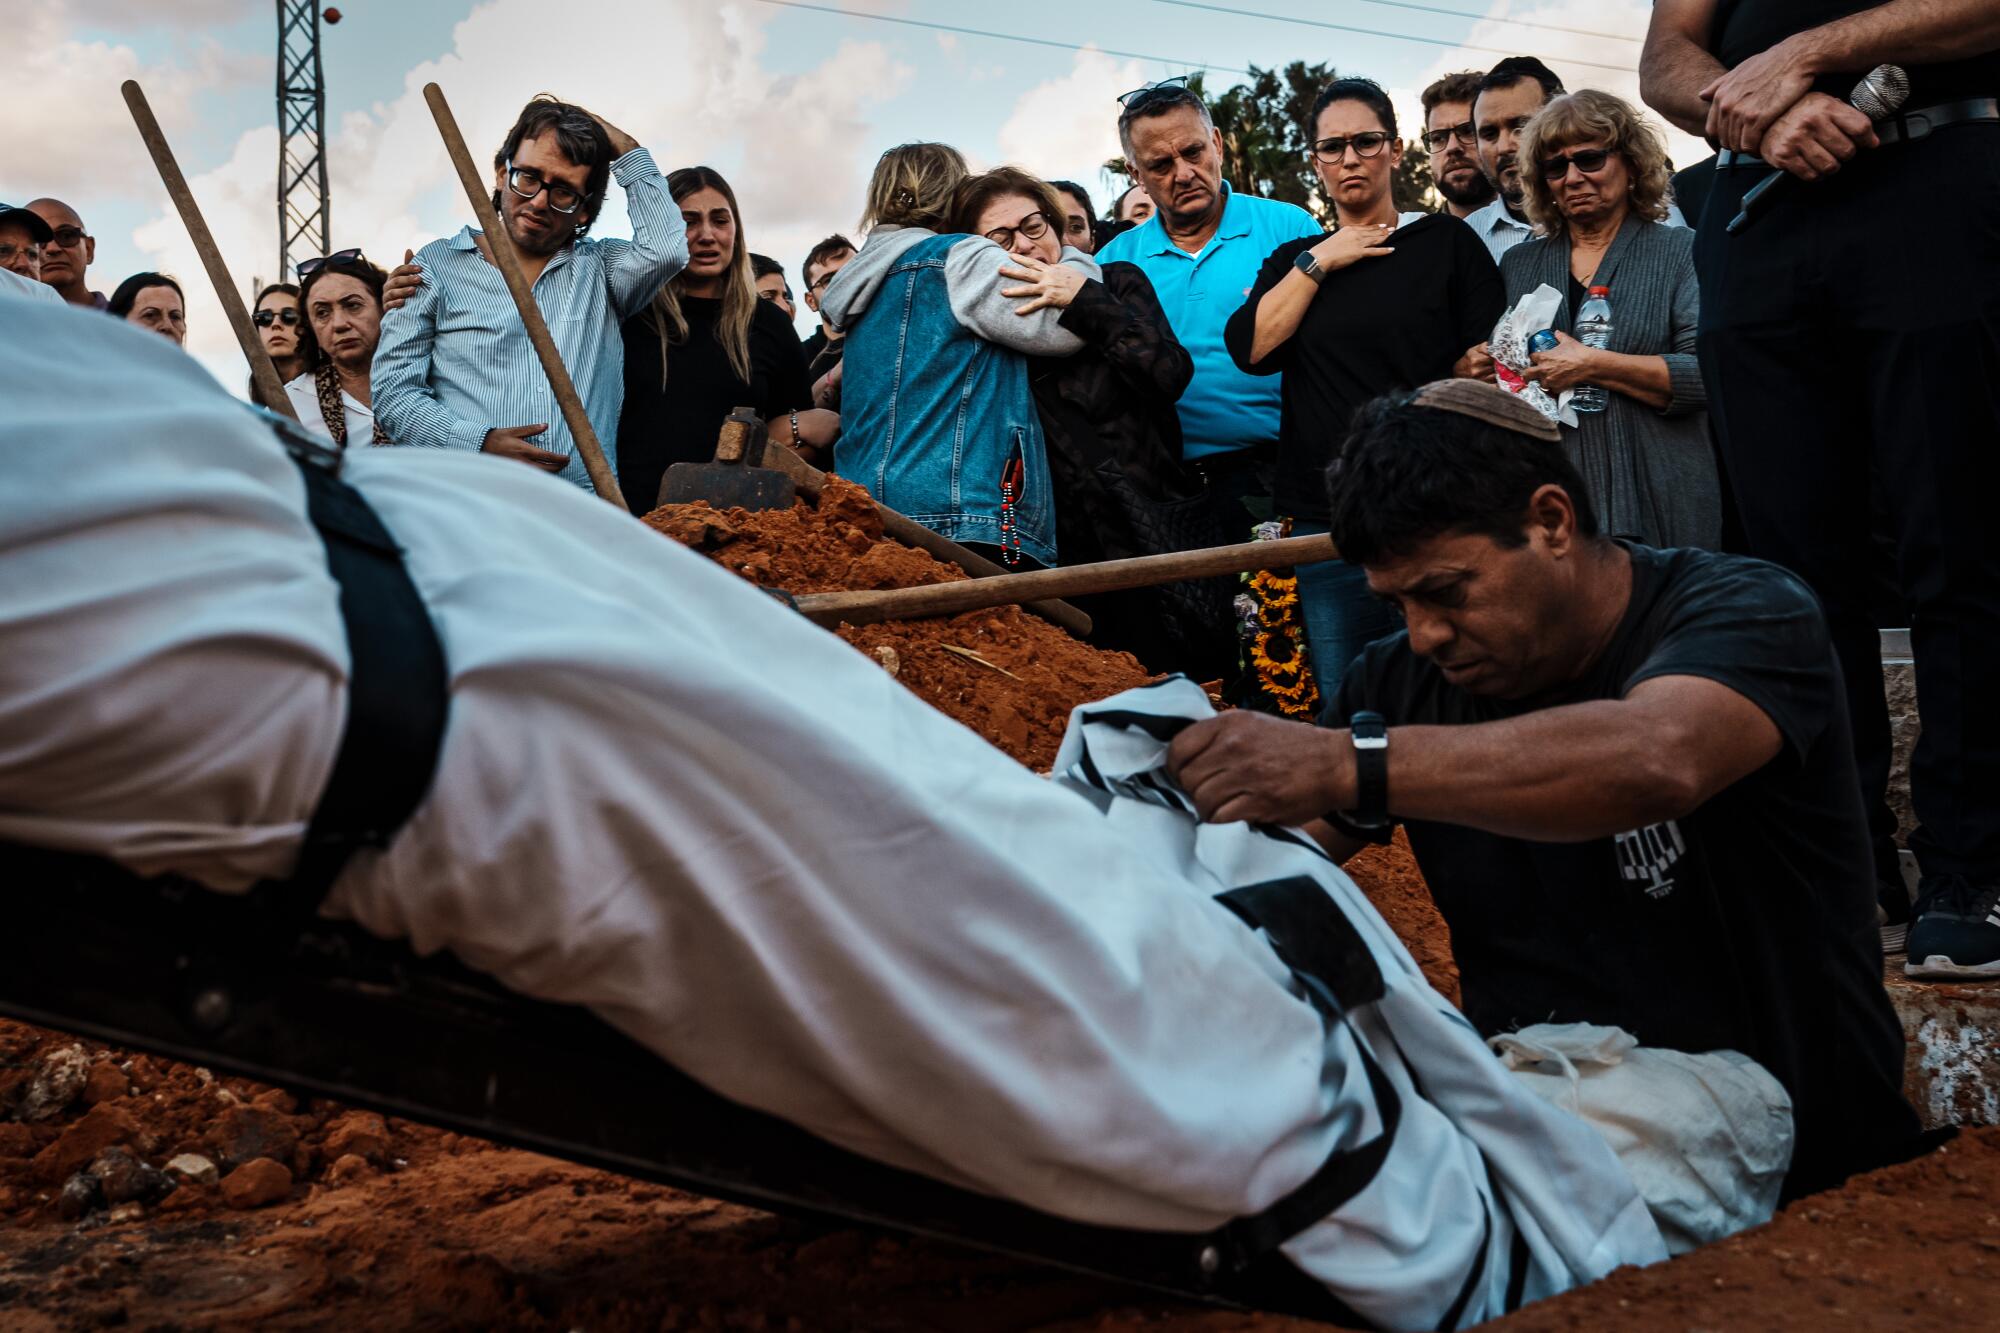 People watch as a body wrapped in white cloth is lowered in the ground 